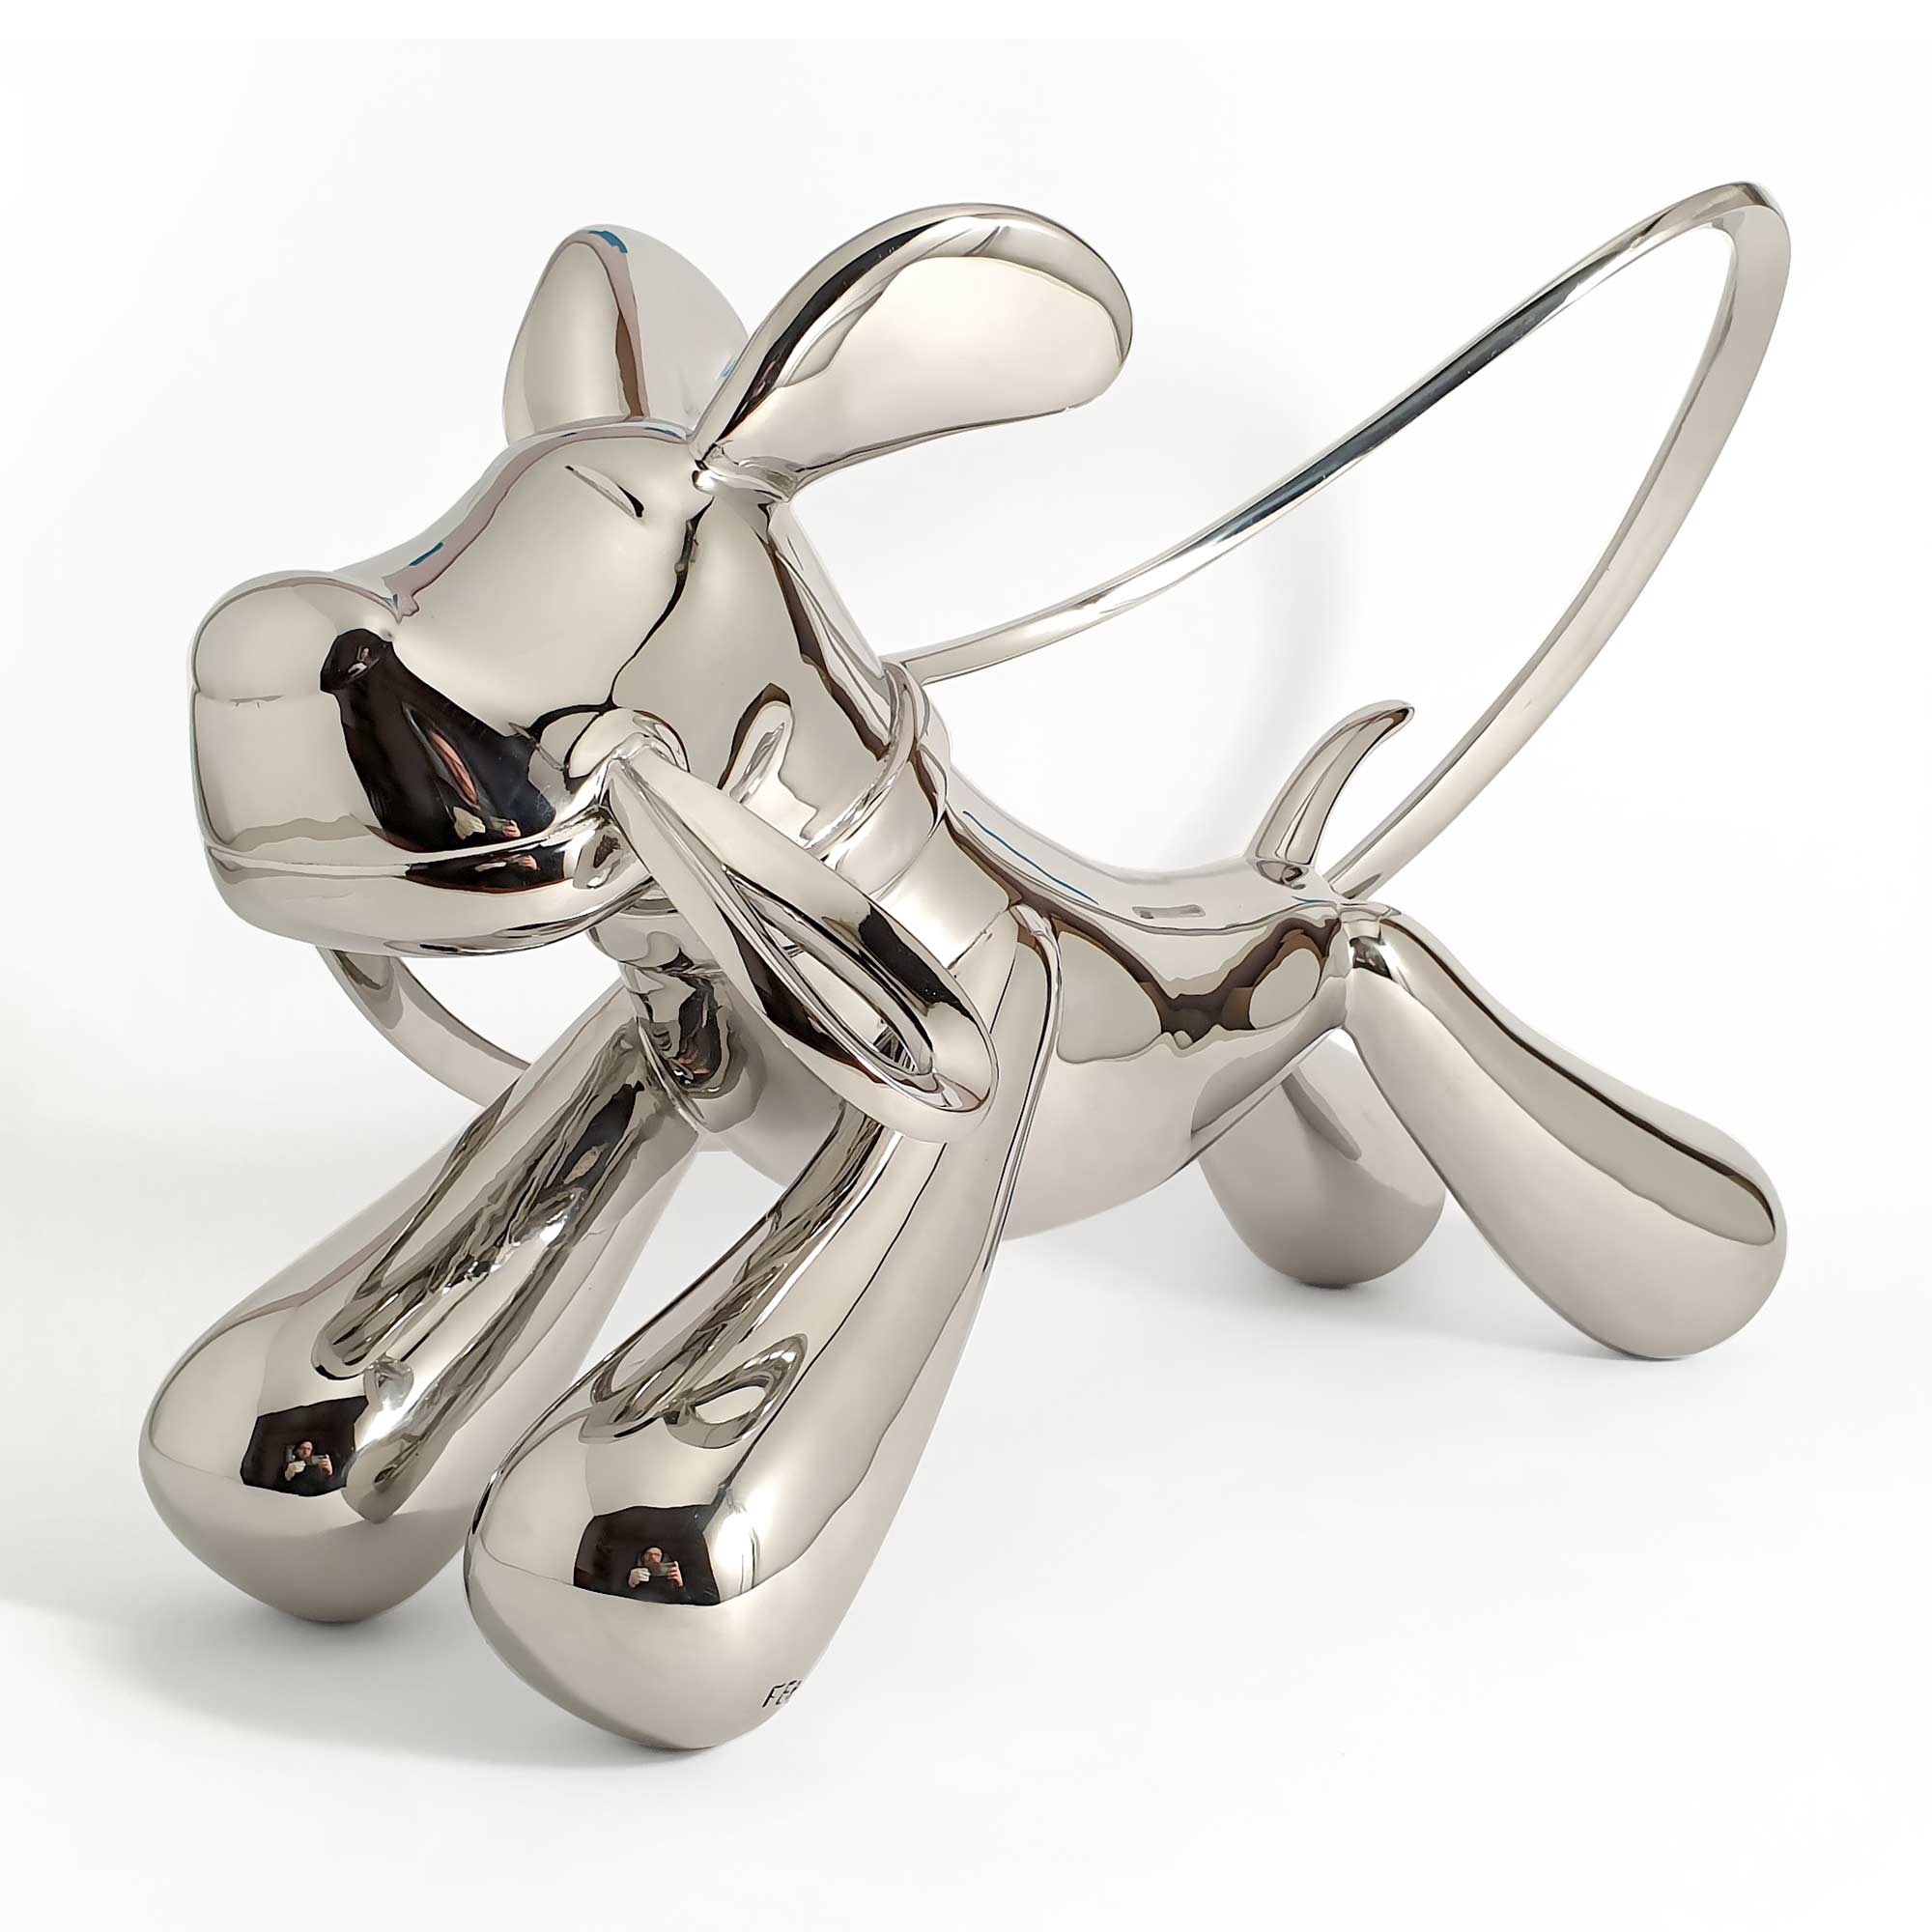 Taking the lead, dog sculpture, Mirror Polished Stainless Steel Sculpture, by artist Ferdi B Dick, 45 view